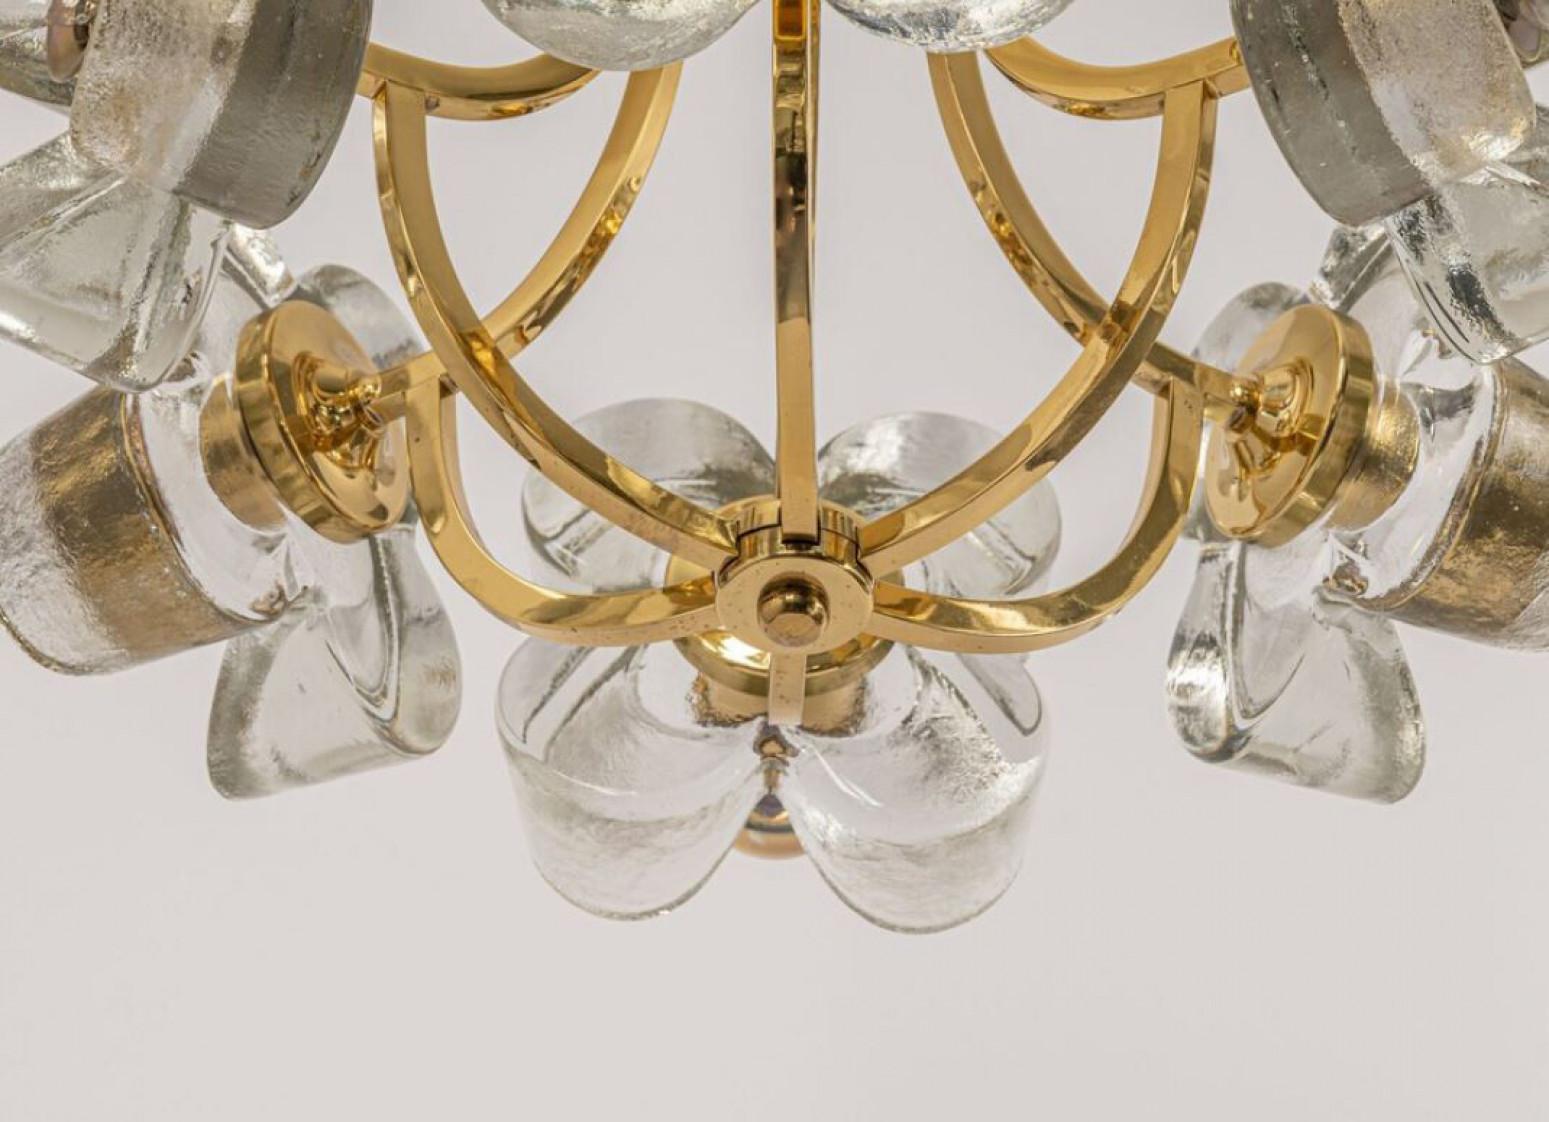 Other 1 of 2 Sische Glass and Brass Chandelier, 1960s Modernist Design, Kalmar Style For Sale